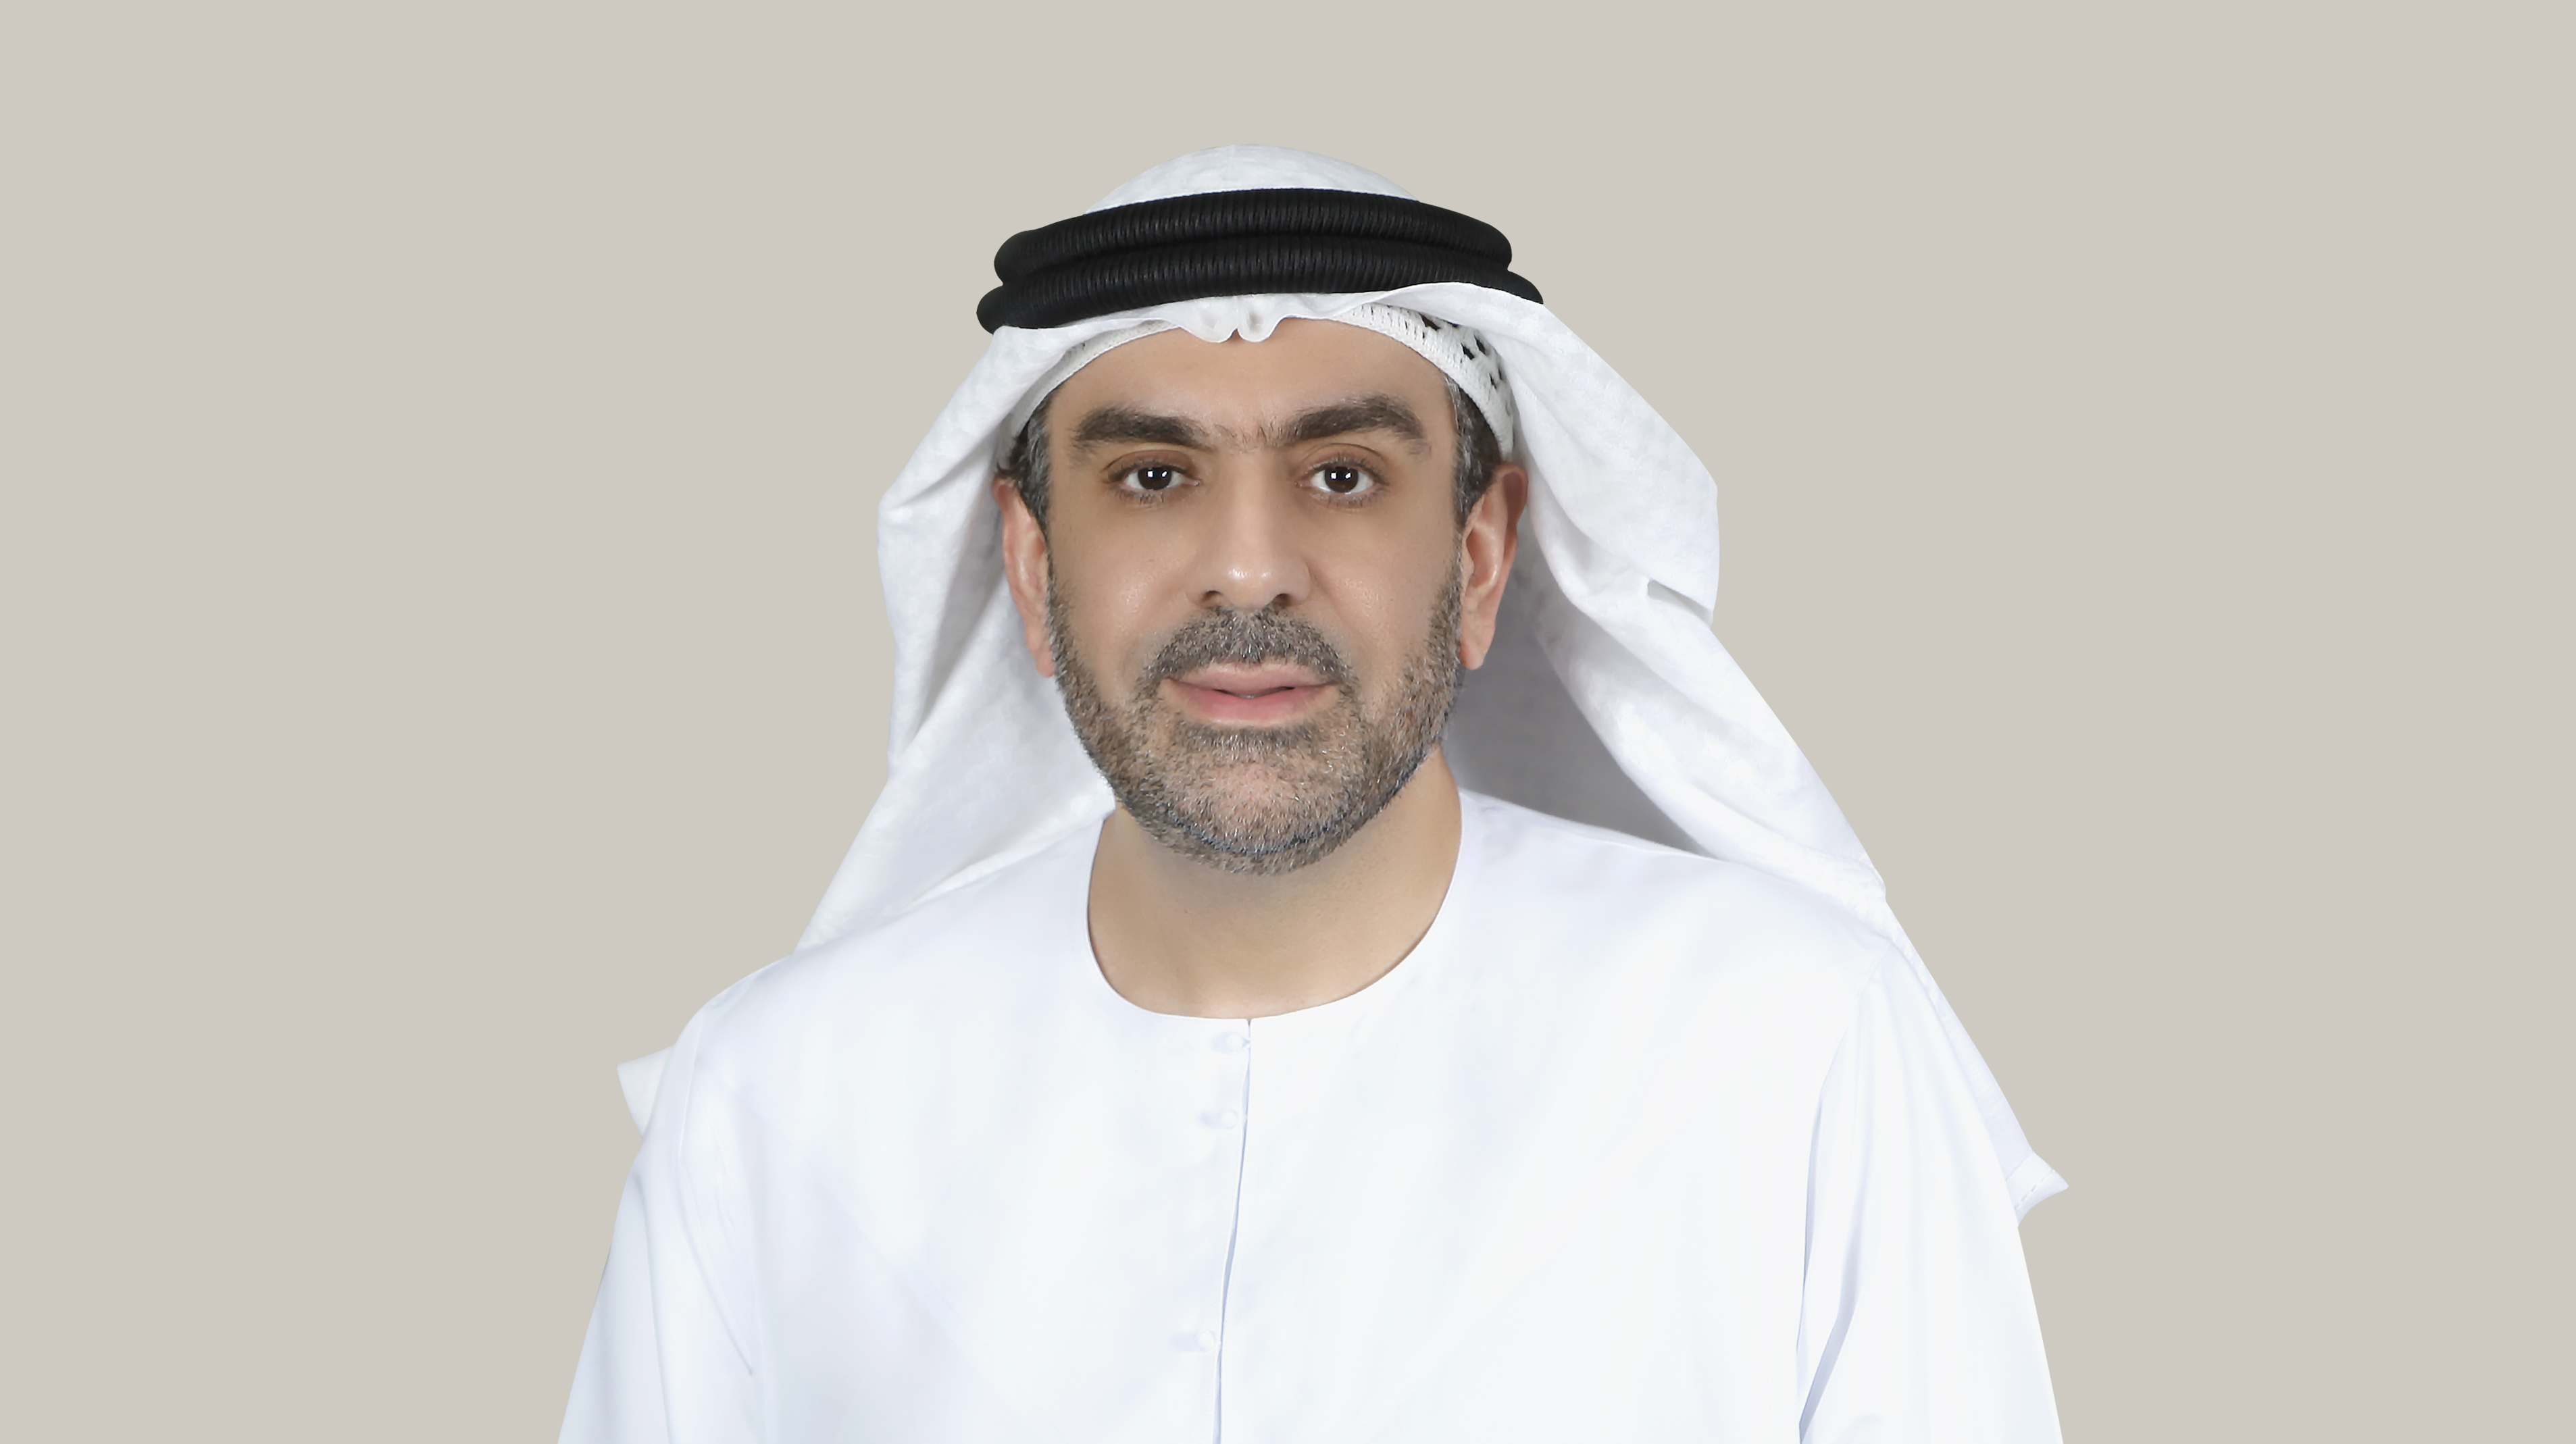 Statement by HE Dr Mohammed Salim Al Olama, Undersecretary of the Ministry of Health, and Prevention (MoHAP) on World Health Day